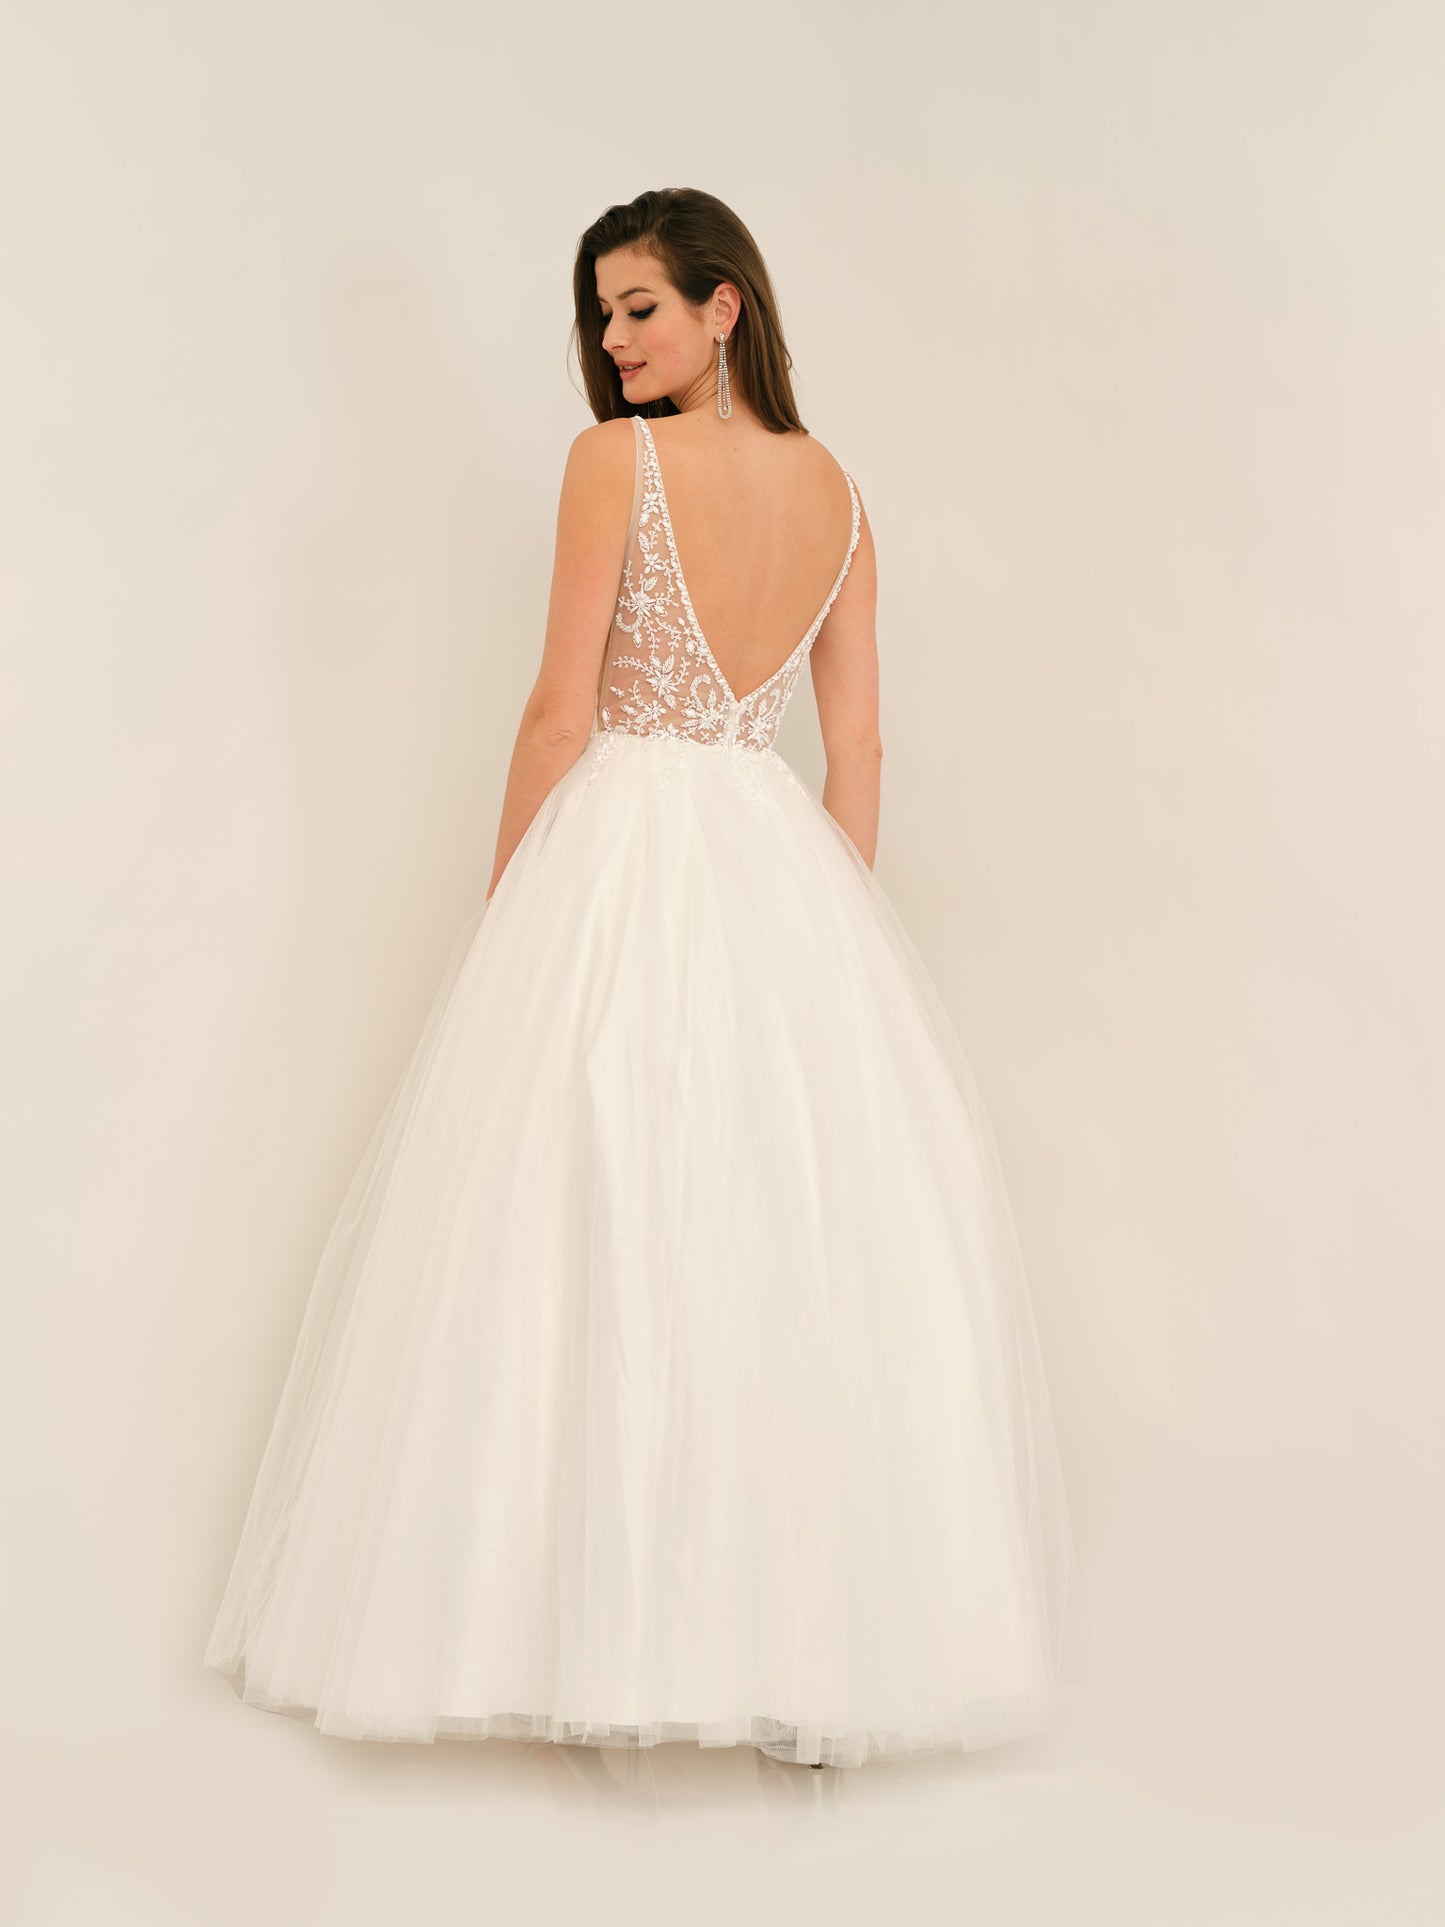 DEEP SWEETHEART LACE BALLGOWN WEDDING GOWN